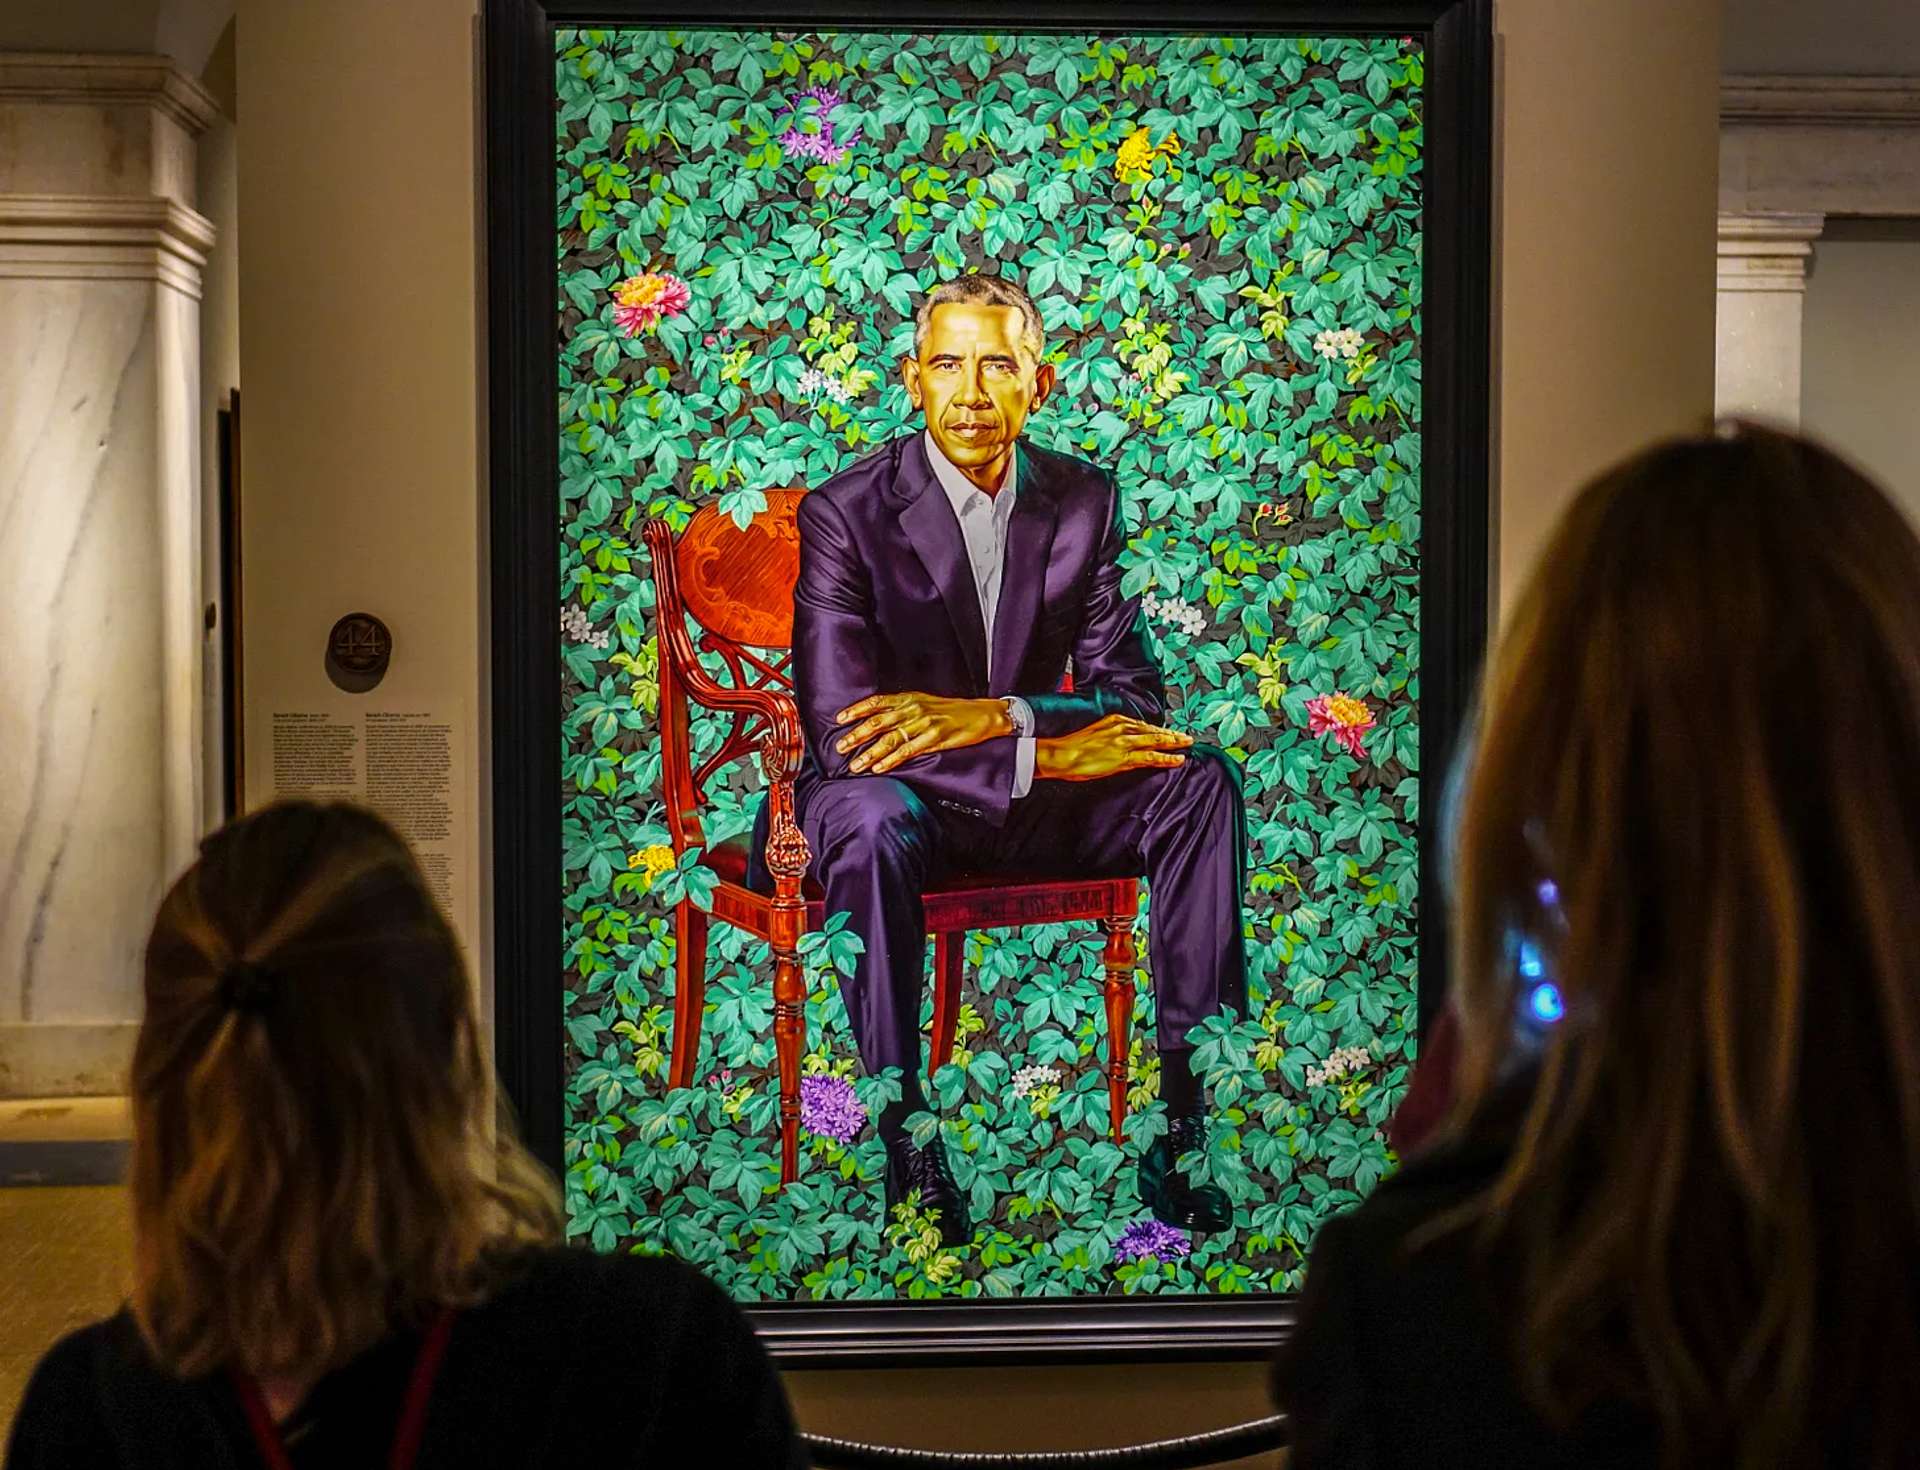 A portrait by Kehinde Wiley of President Barack Obama. He is seated in a chair with his arms folded across his lap wearing a dark suit. He’s placed in front of a brightly coloured background of green foliage.